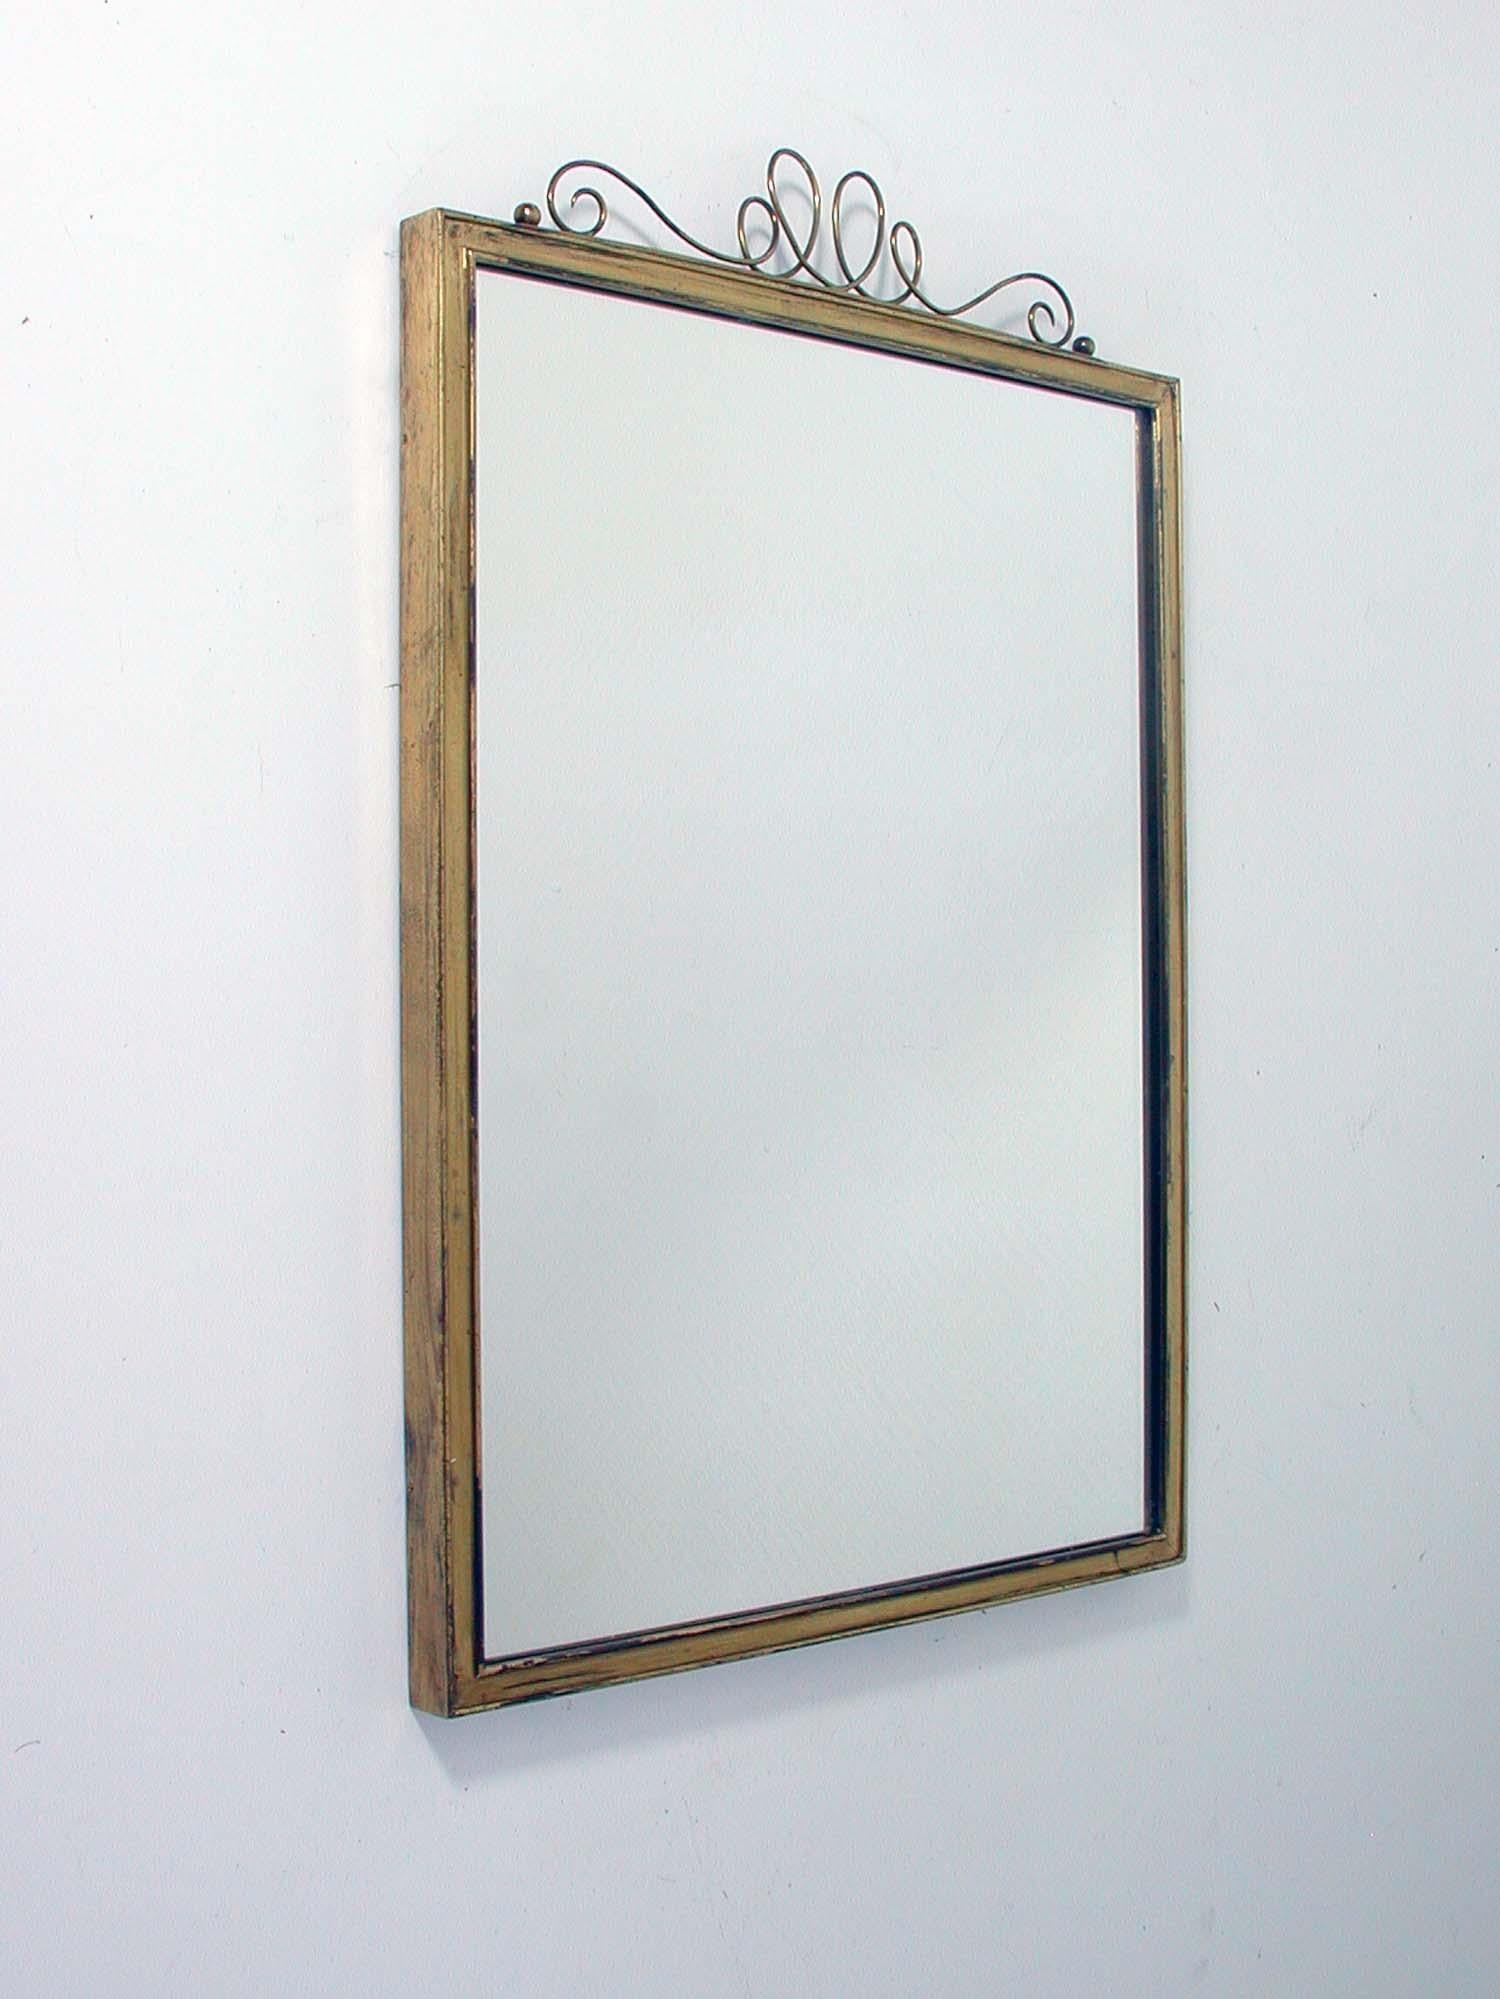 Midcentury Brass Wall Mirror, 1950s For Sale 7